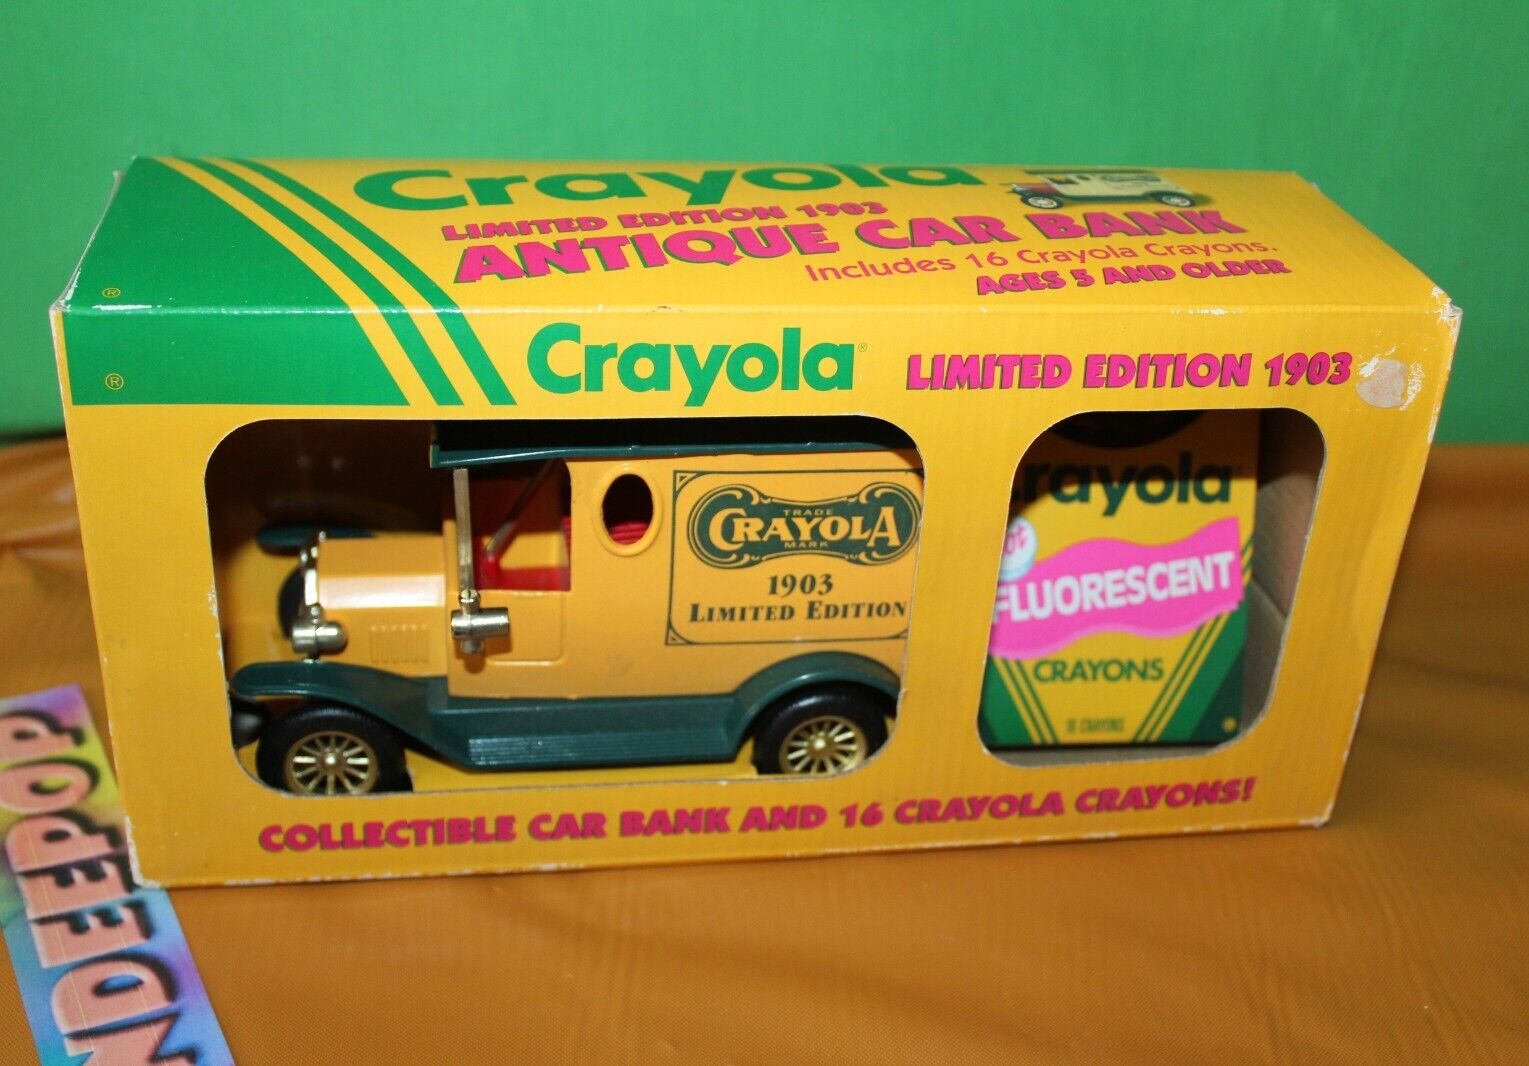 Crayola Ltd Edition 1903 Collectible Car Bank And Fluorescent Crayons 1993 Toy